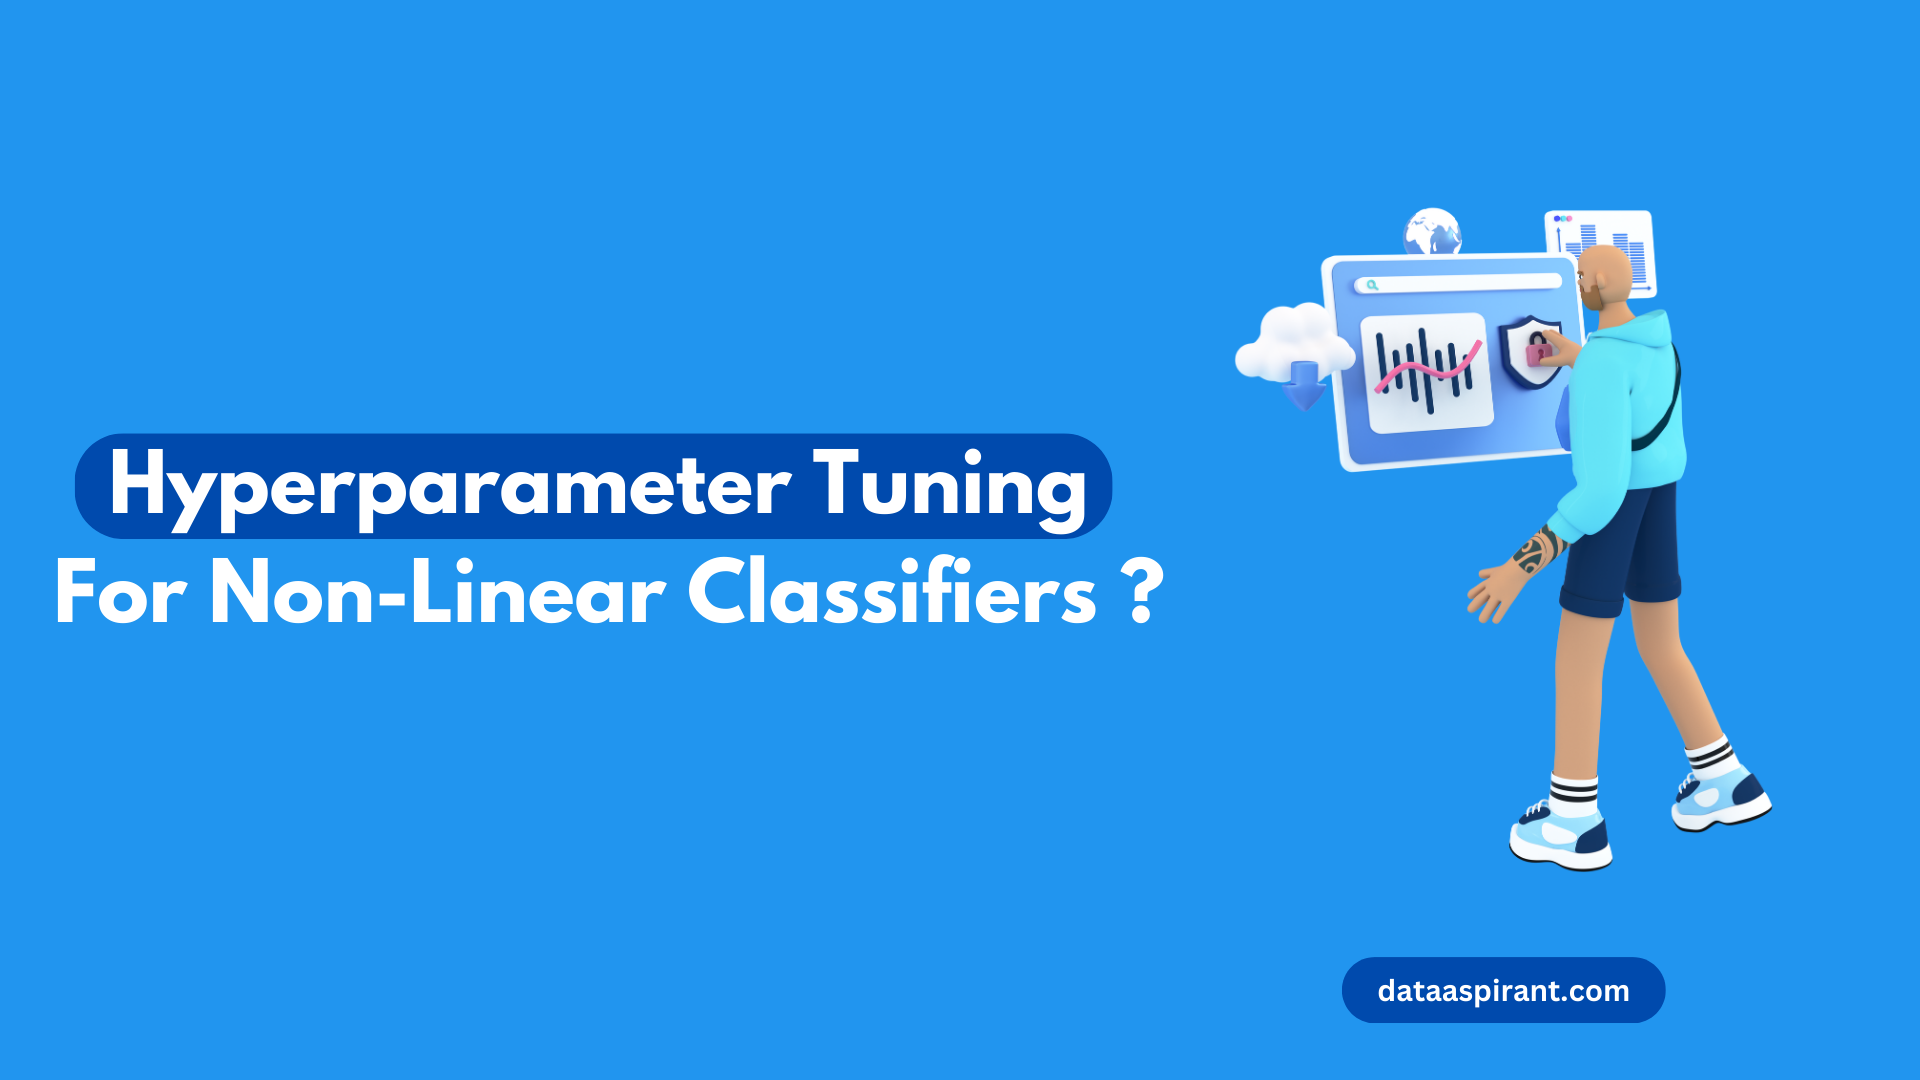 Hyperparameter Tuning and Model Selection For Non-Linear Classifiers